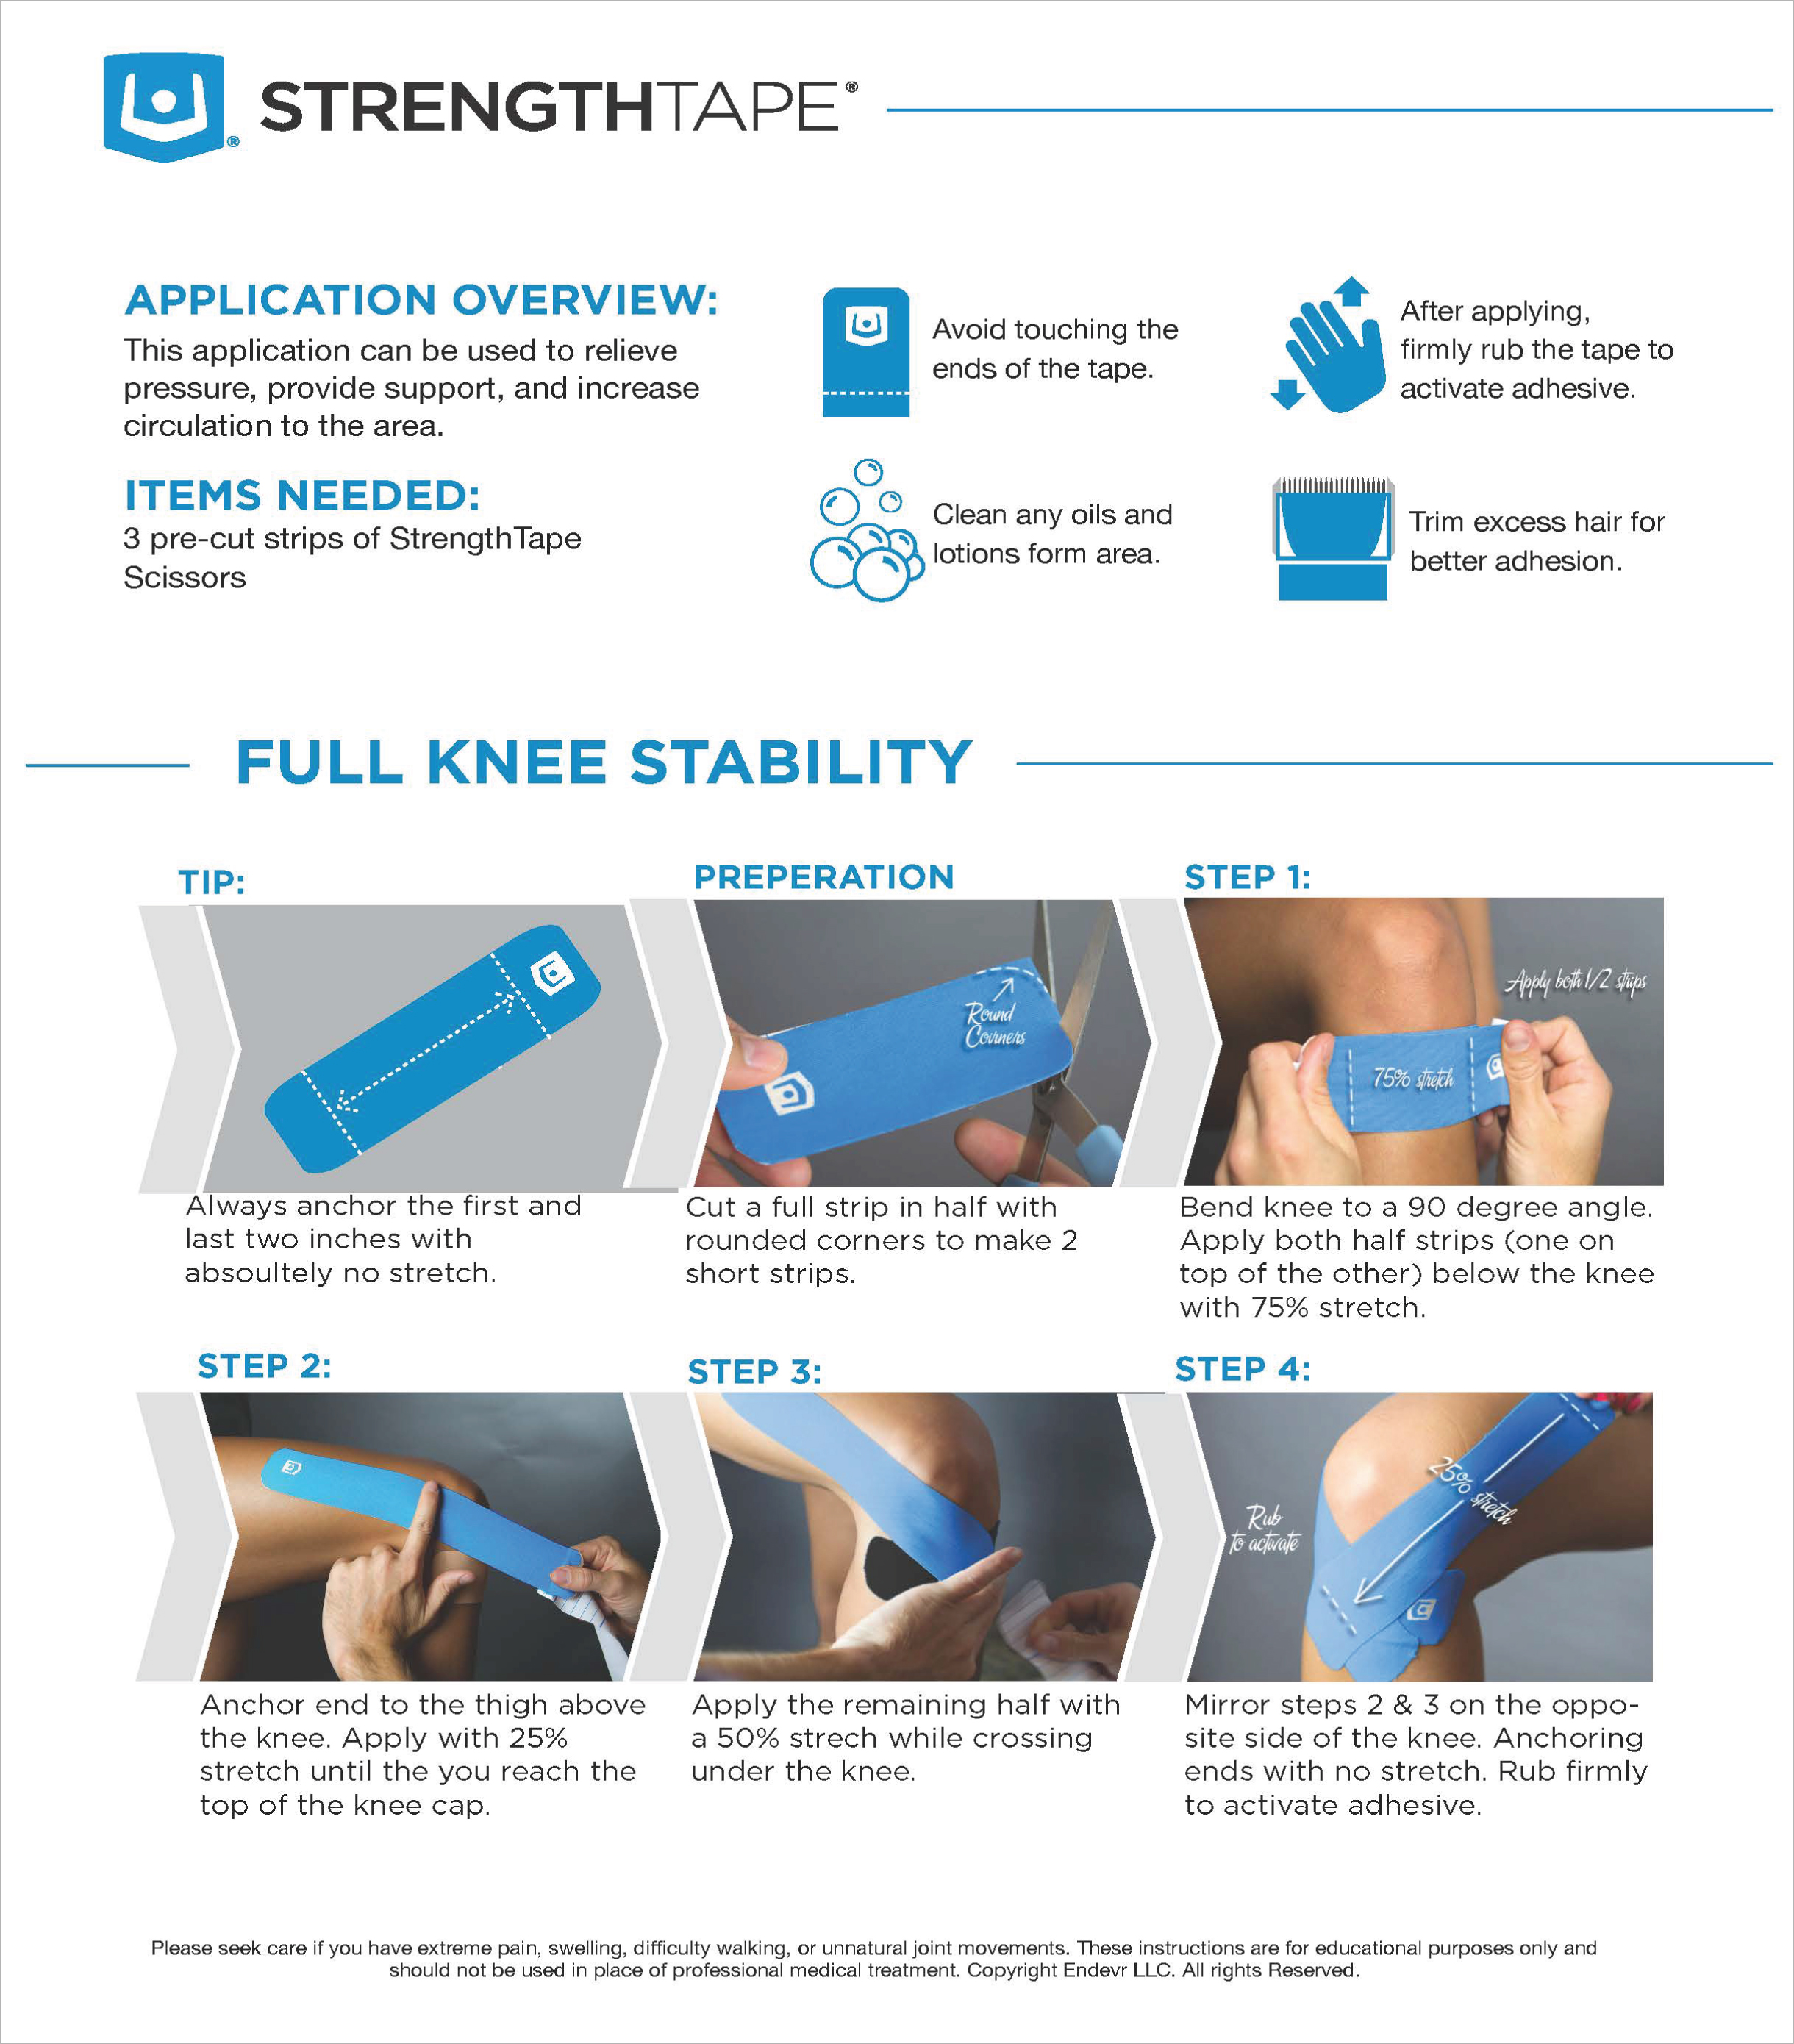 StrengthTape Knee Stability Taping Instructions